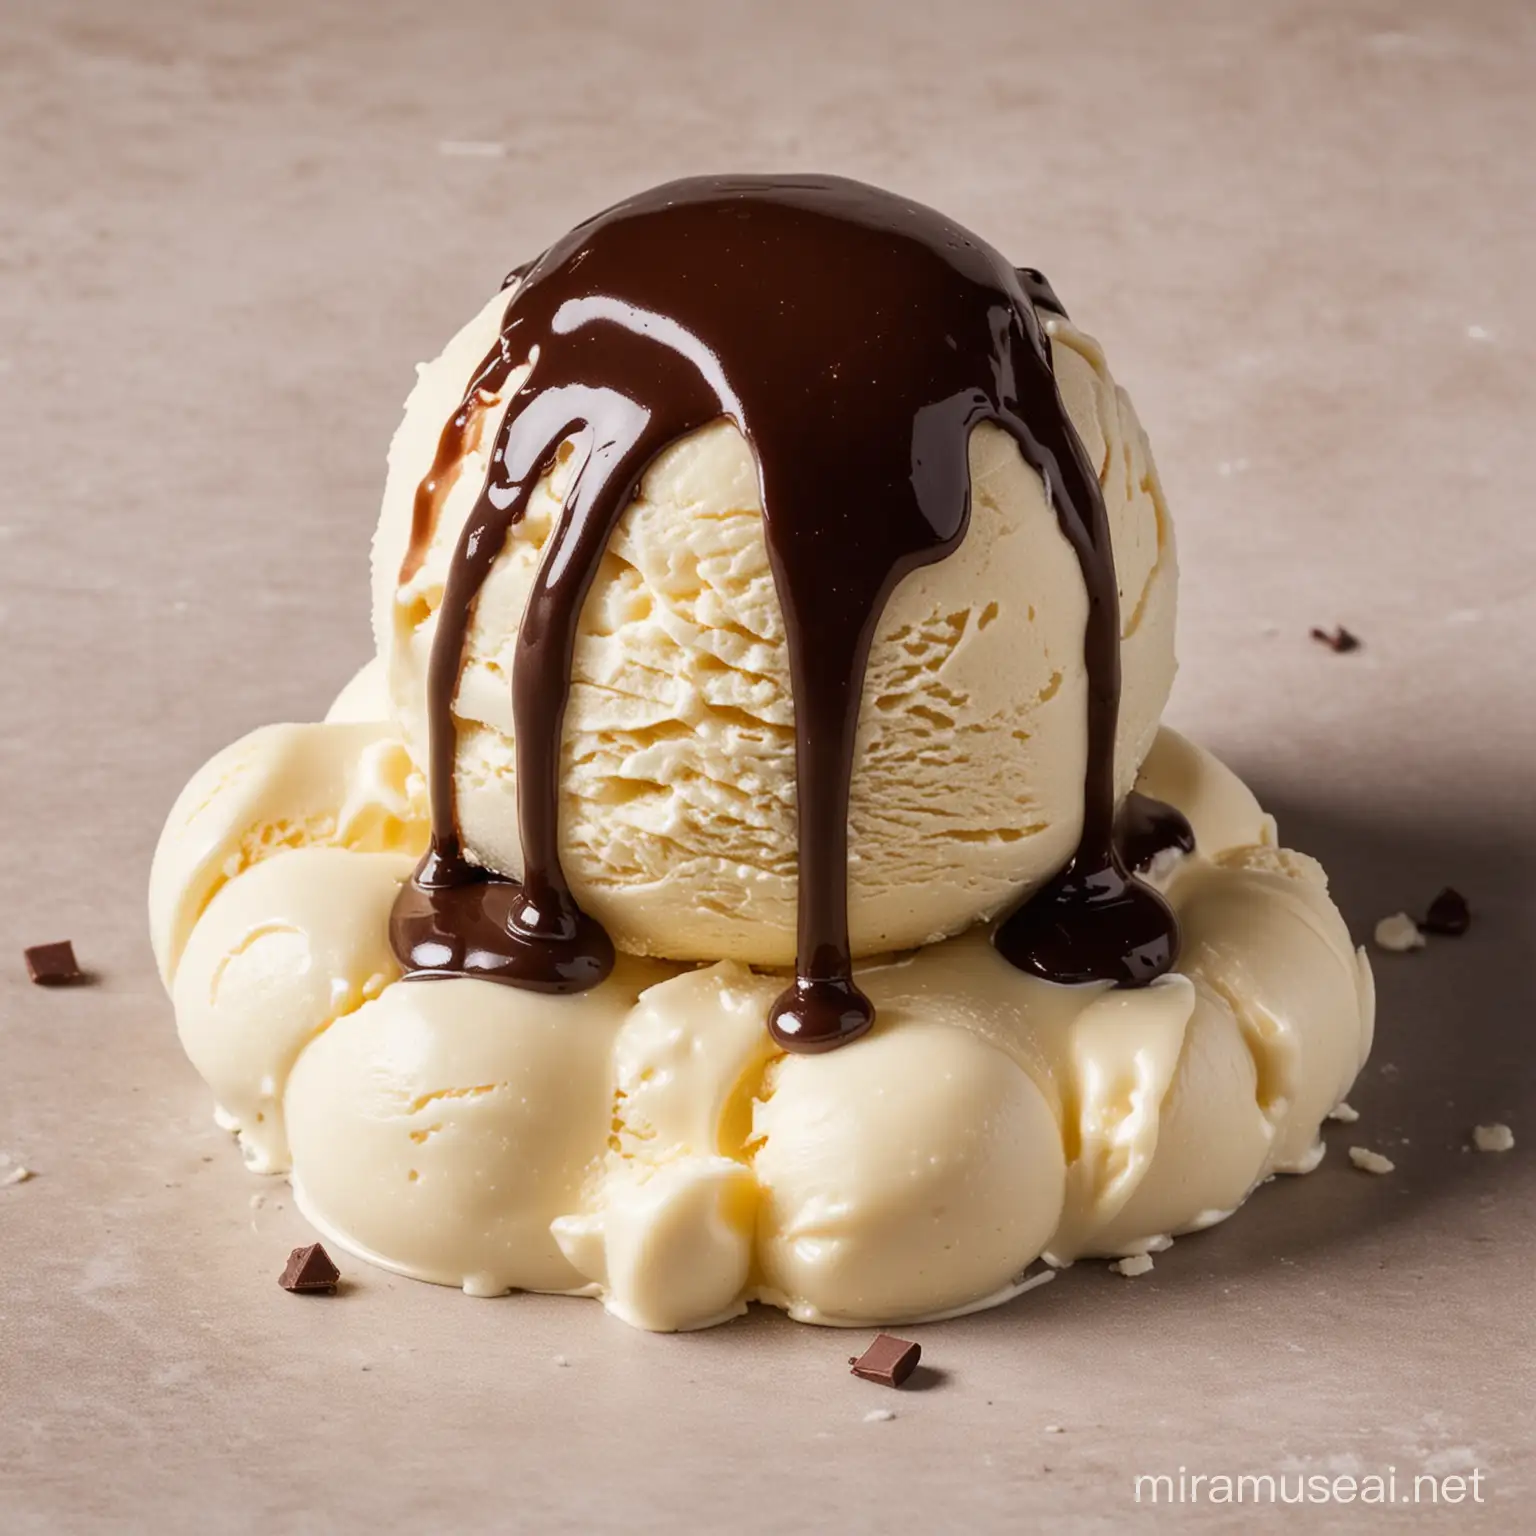 Delicious Milk Ice Cream with Rich Chocolate Sauce